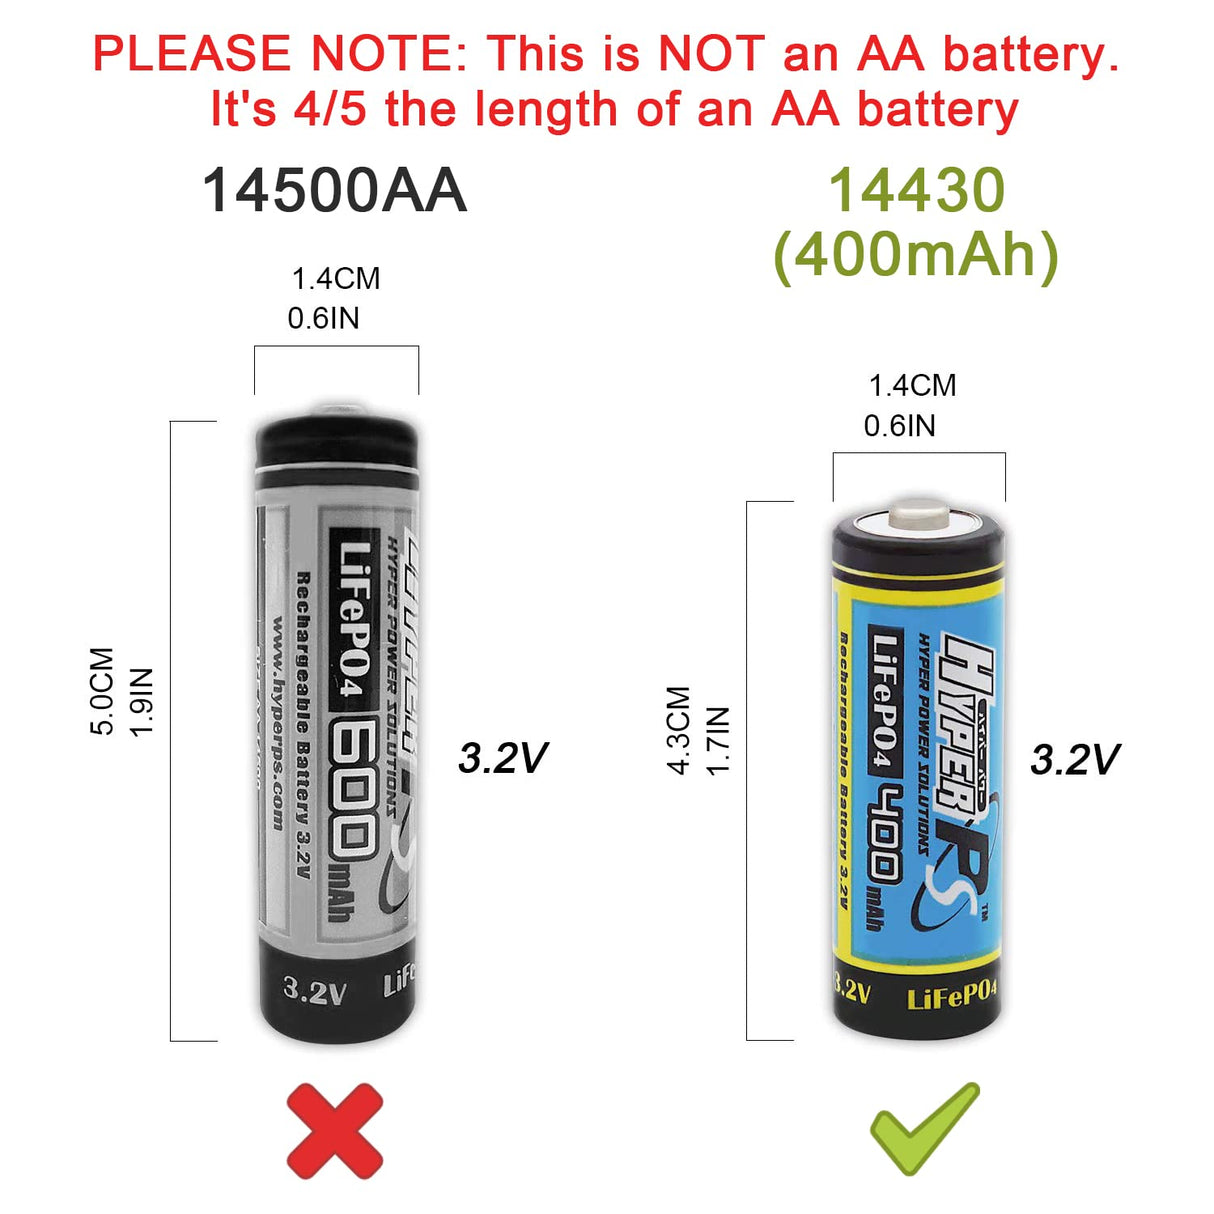 HYPERPS (4-Pack) 3.2V LiFePo4 14430 4/5 AA (14 x 43mm) 400mAh Rechargeable Battery for Solar Panel Light, Tooth Brush, Shaver, Flashlight with a Battery Carry case